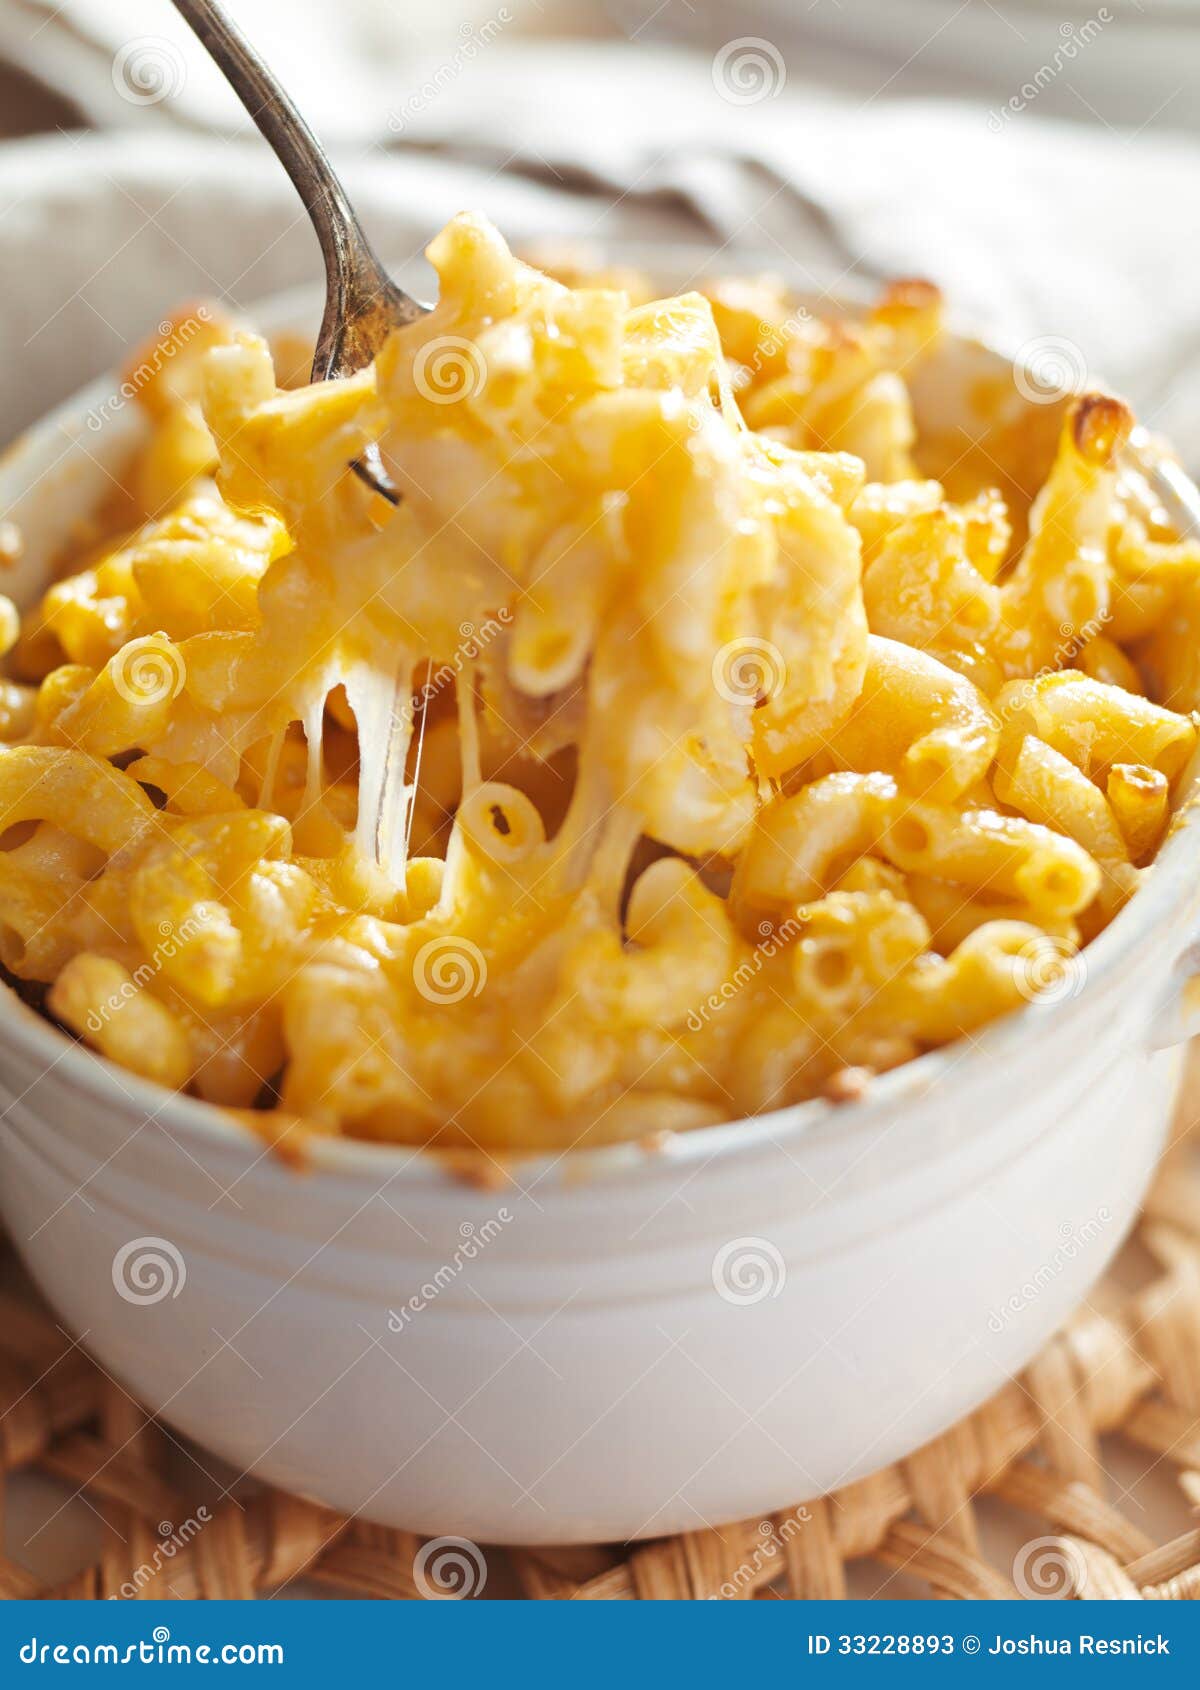 spoon picking up macaroni and cheese